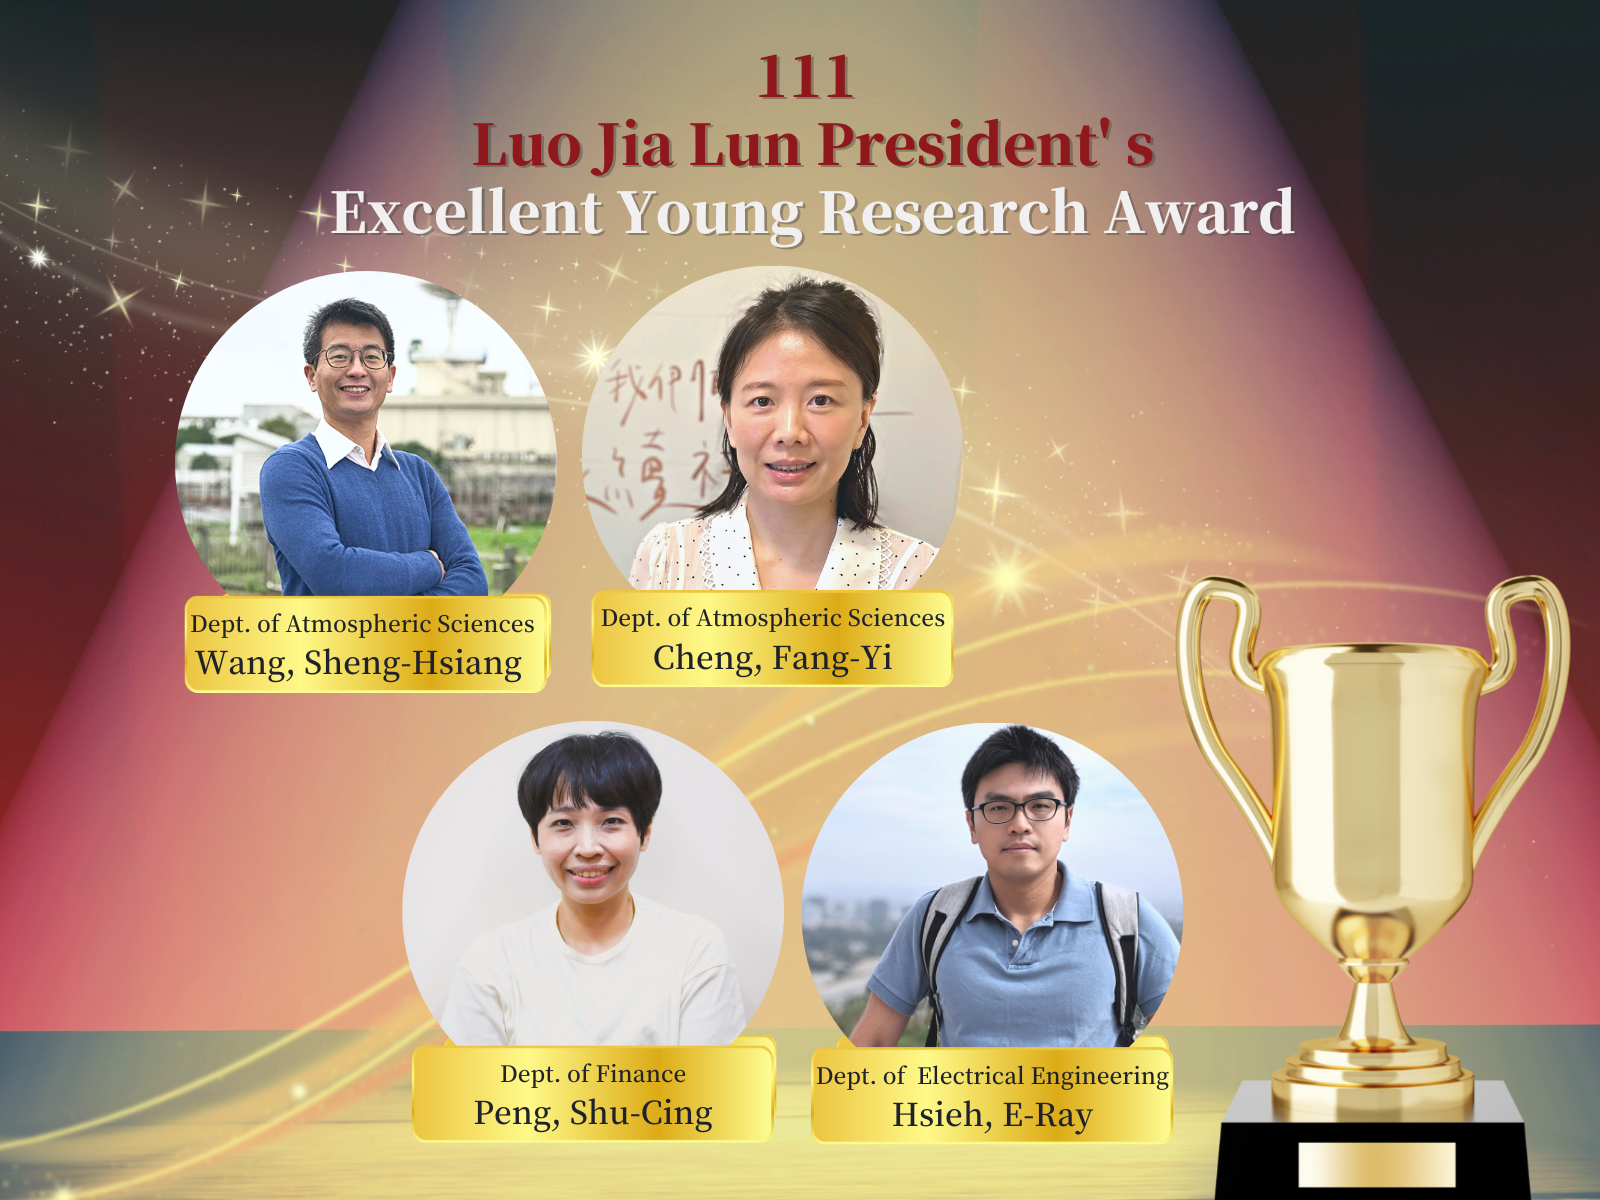 111 Luo Jia Lun President's Excellent Young Research Award